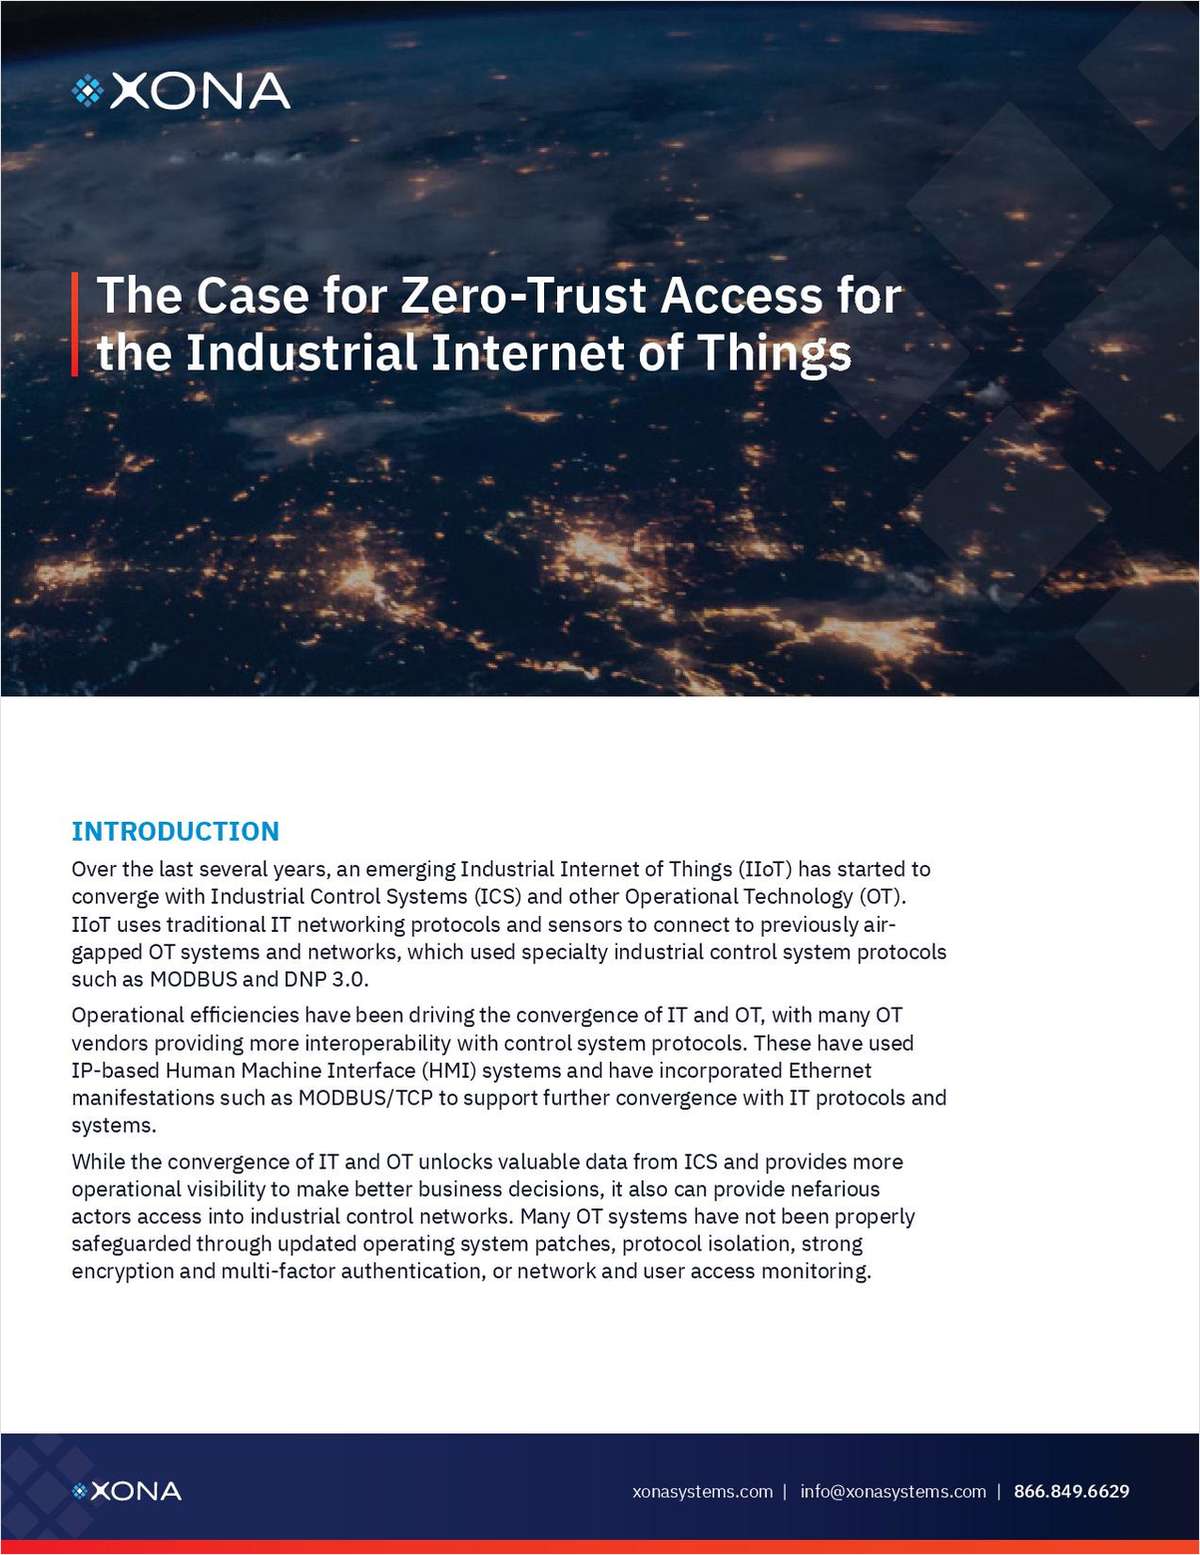 The Case for Zero-Trust Access for the Industrial Internet of Things (IIoT)